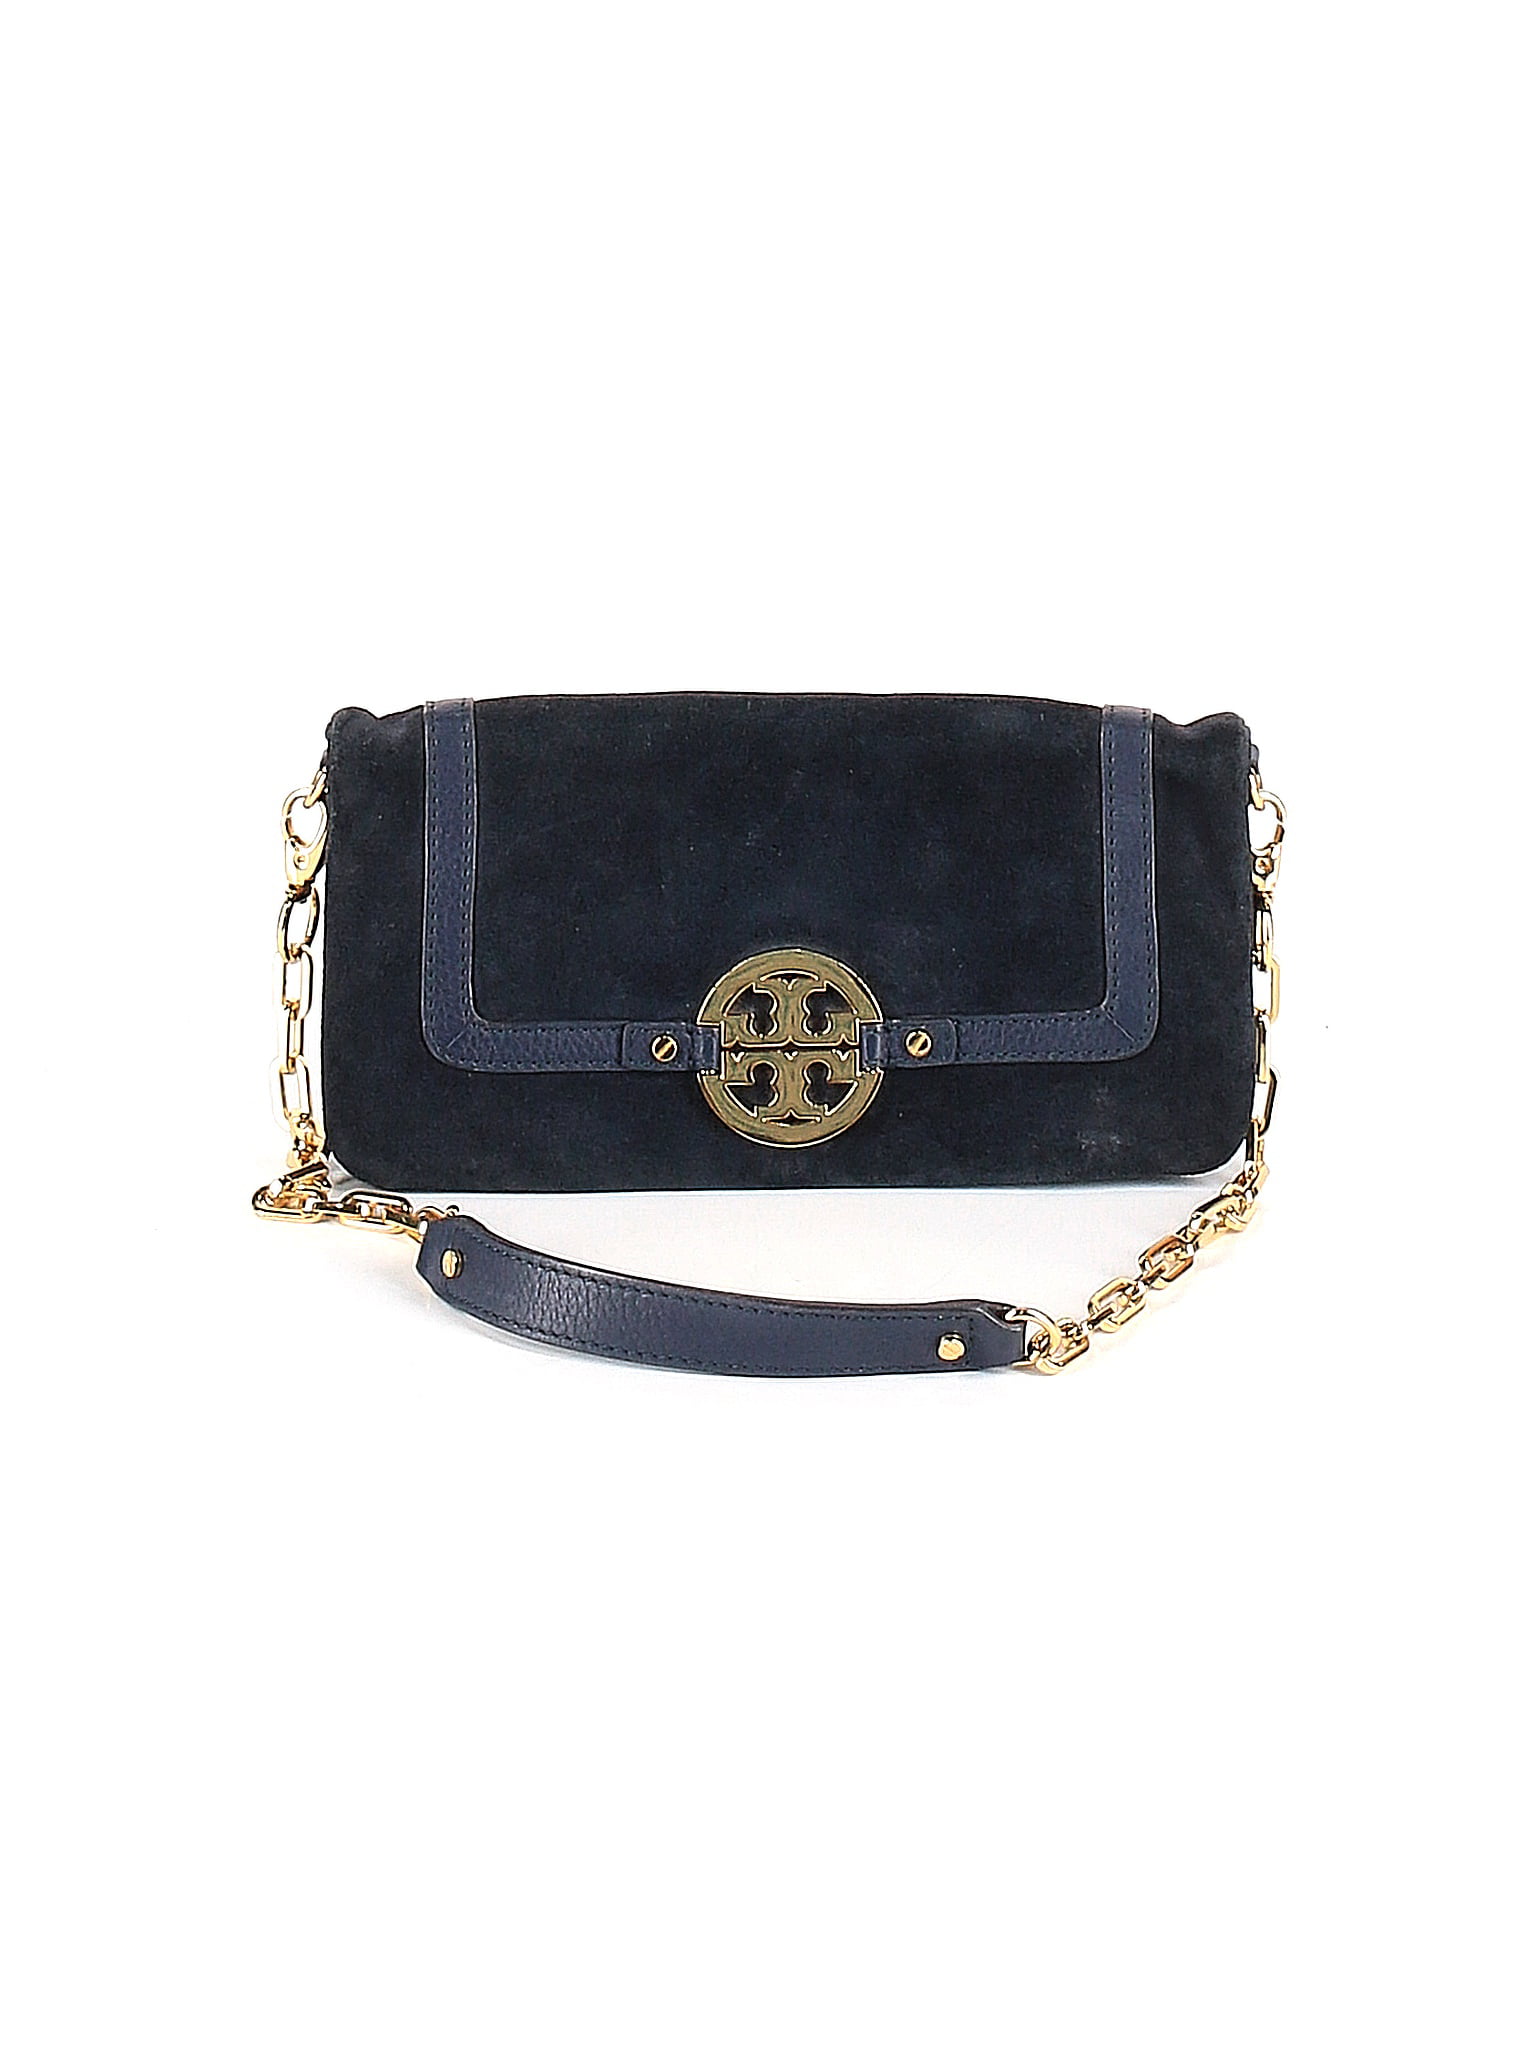 Buy Pre-Owned Tory Burch Womens One Size Fits All Leather Shoulder Bag  Online at Lowest Price in Ubuy Botswana. 335879877